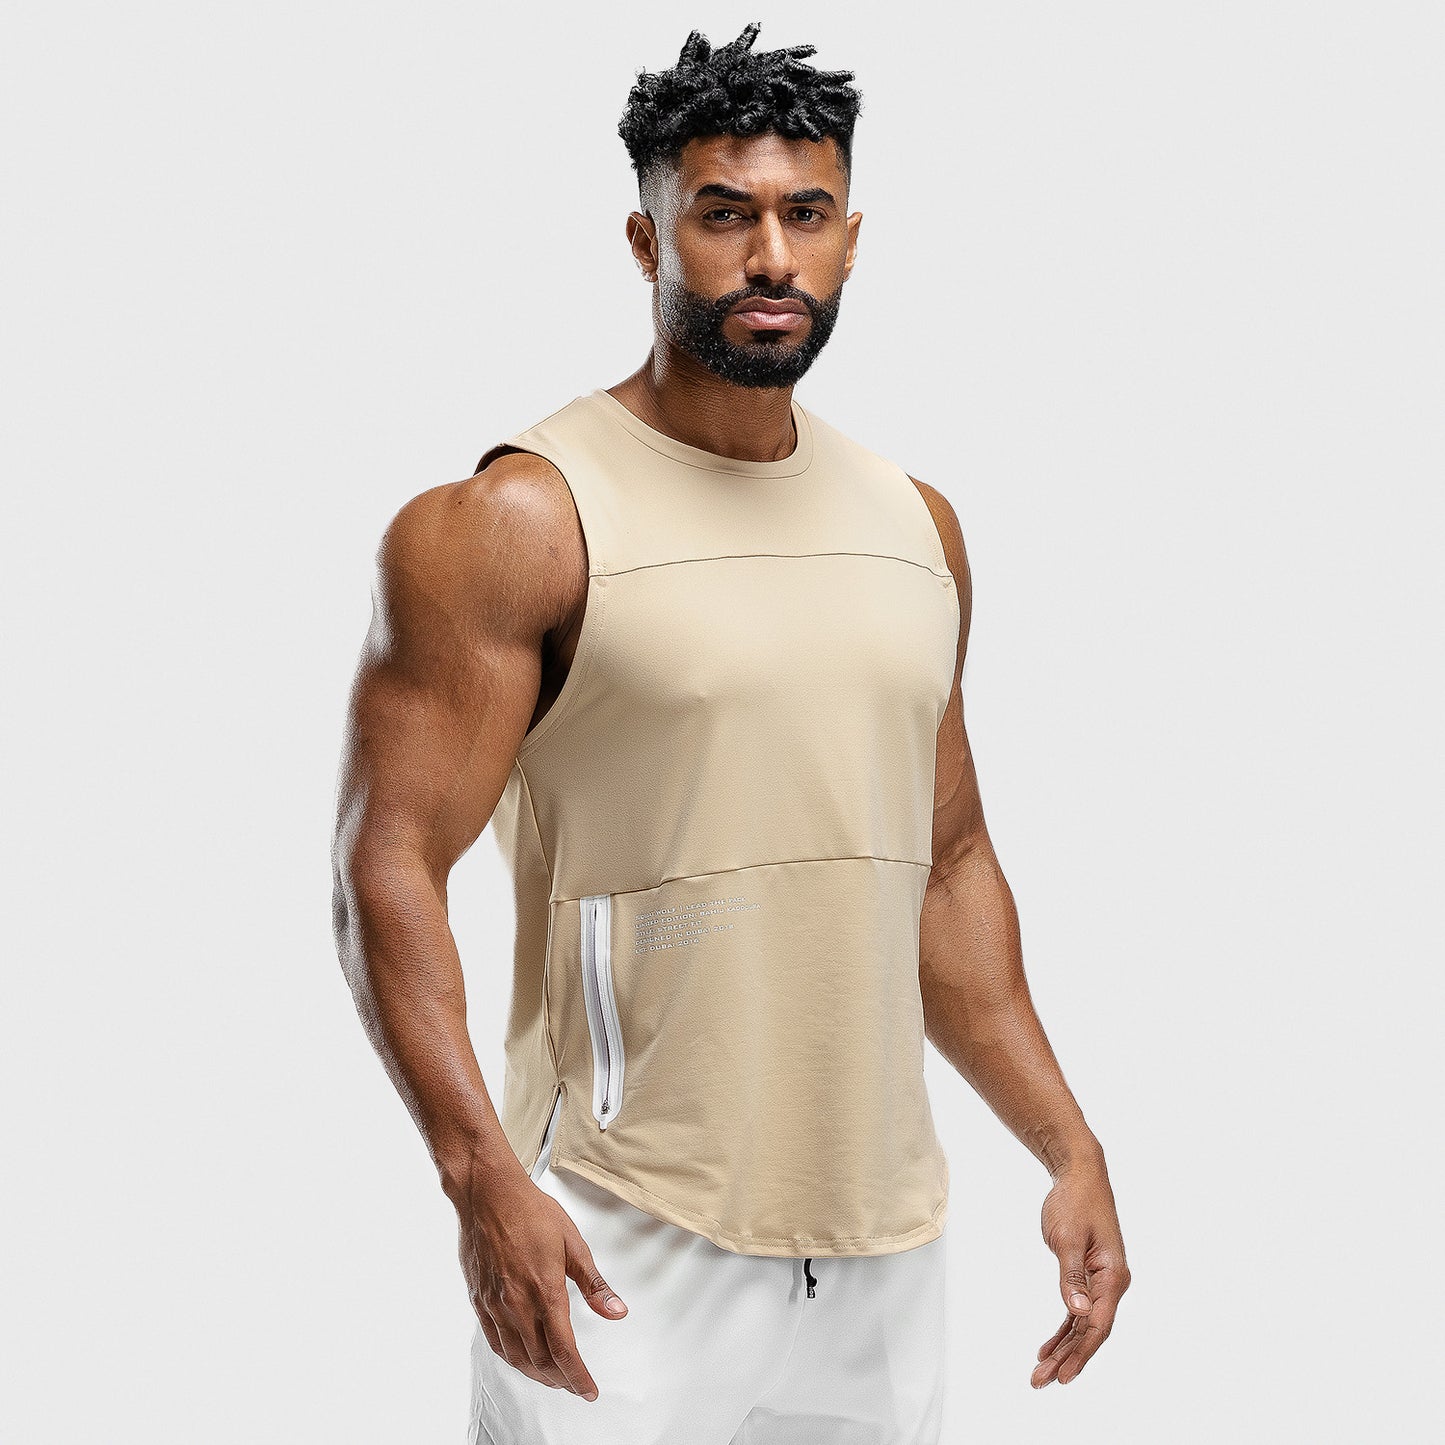 squatwolf-workout-tank-tops-for-men-tank-beige-white-gym-hype